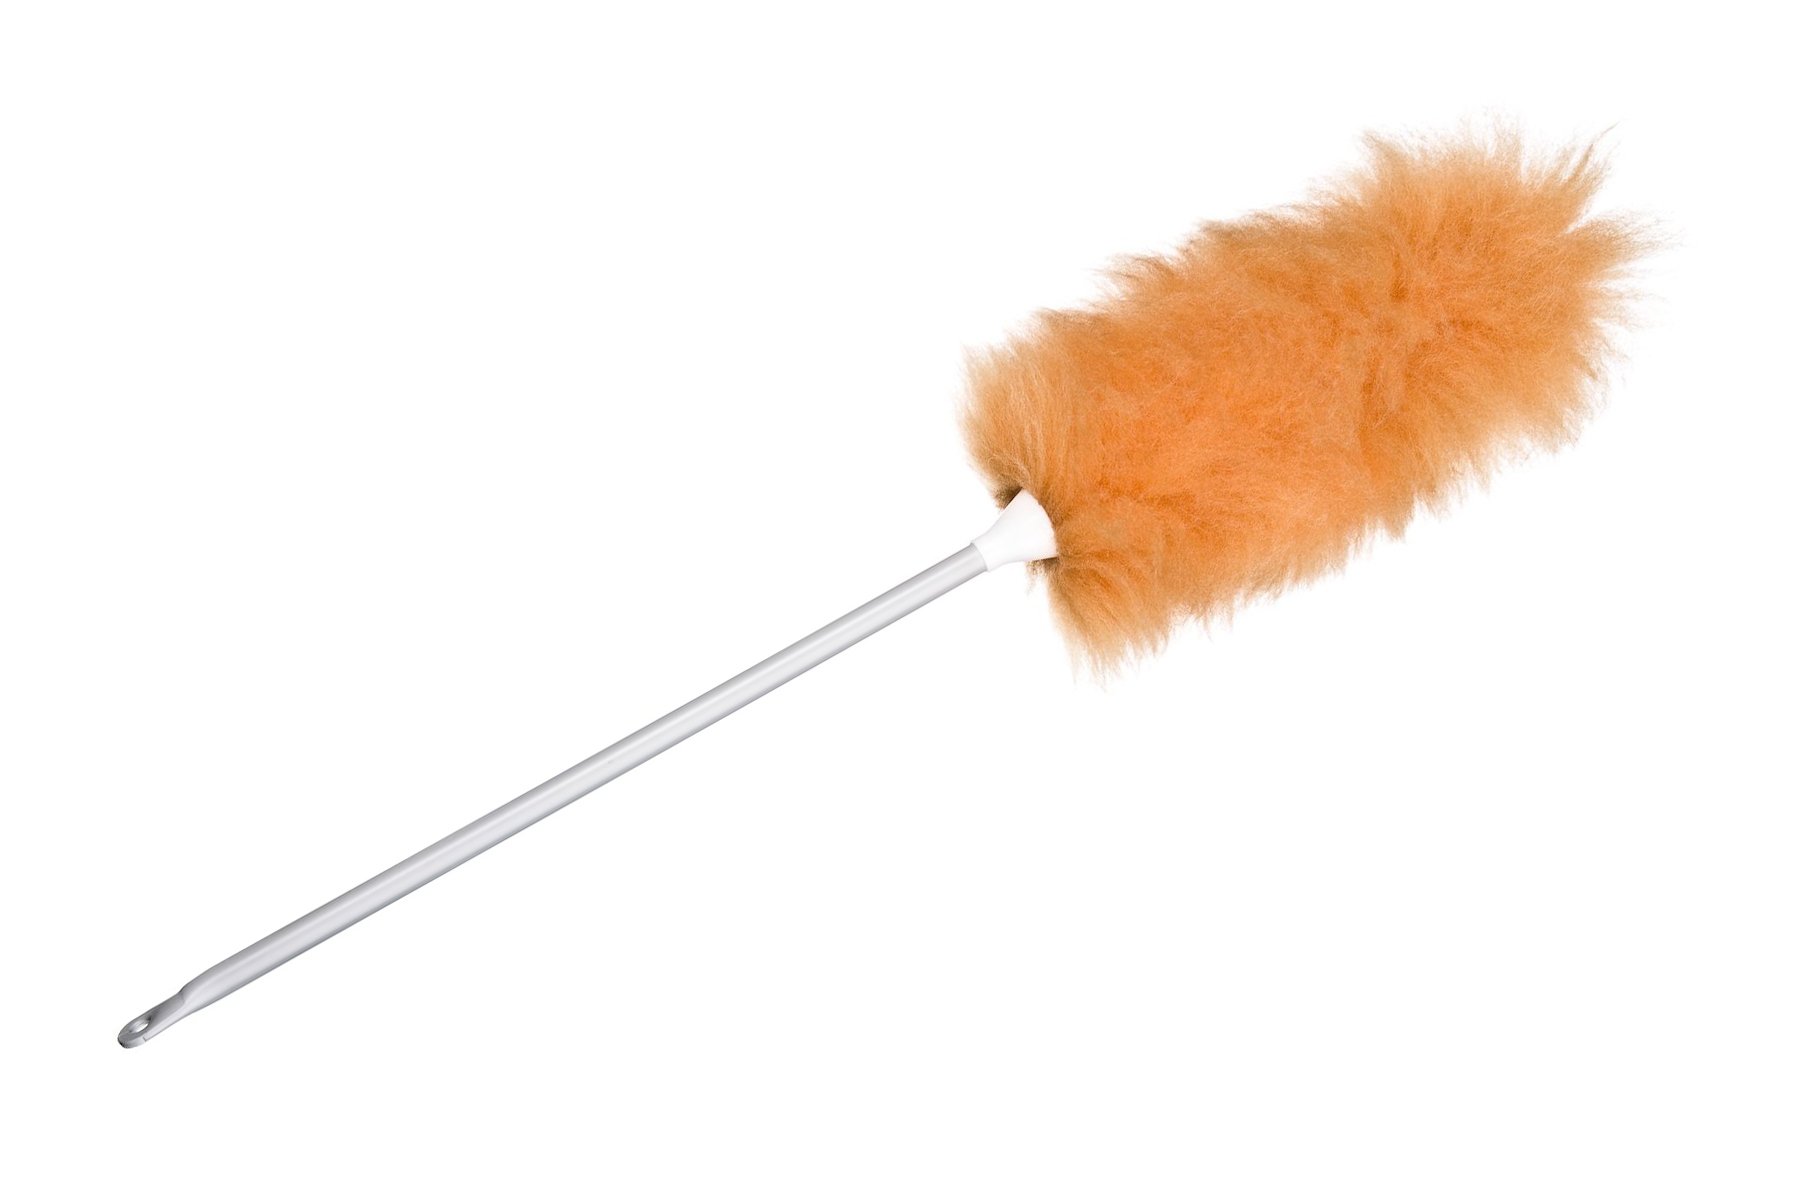 Norpro Pure Lambswool Duster, 12